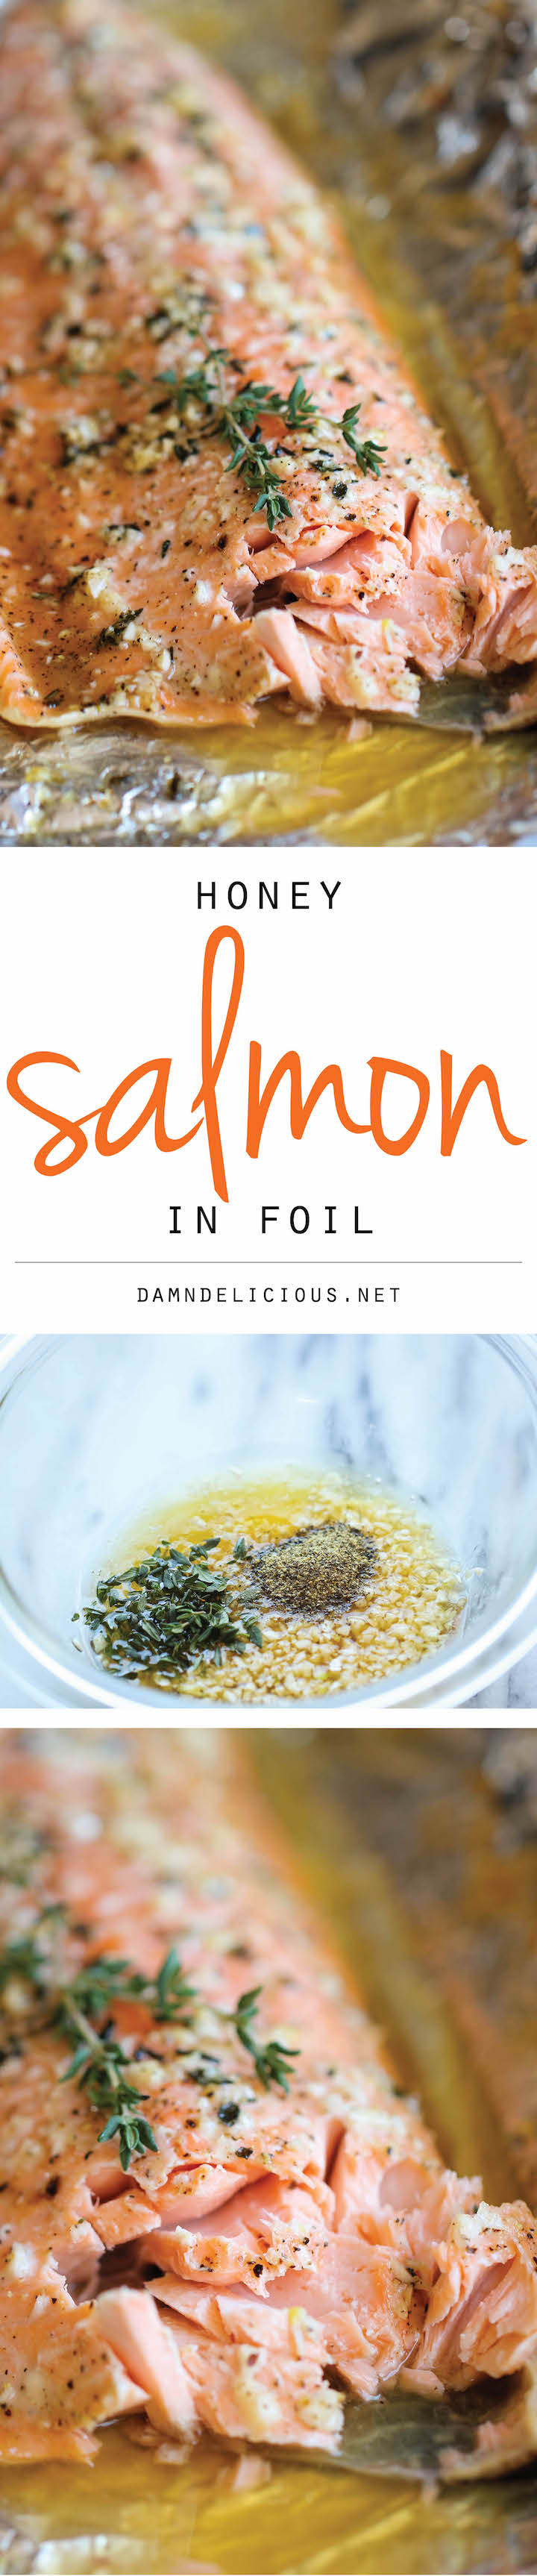 Honey Salmon in Foil - A no-fuss, super easy salmon dish that's baked in foil for the most tender, most flavorful salmon ever!